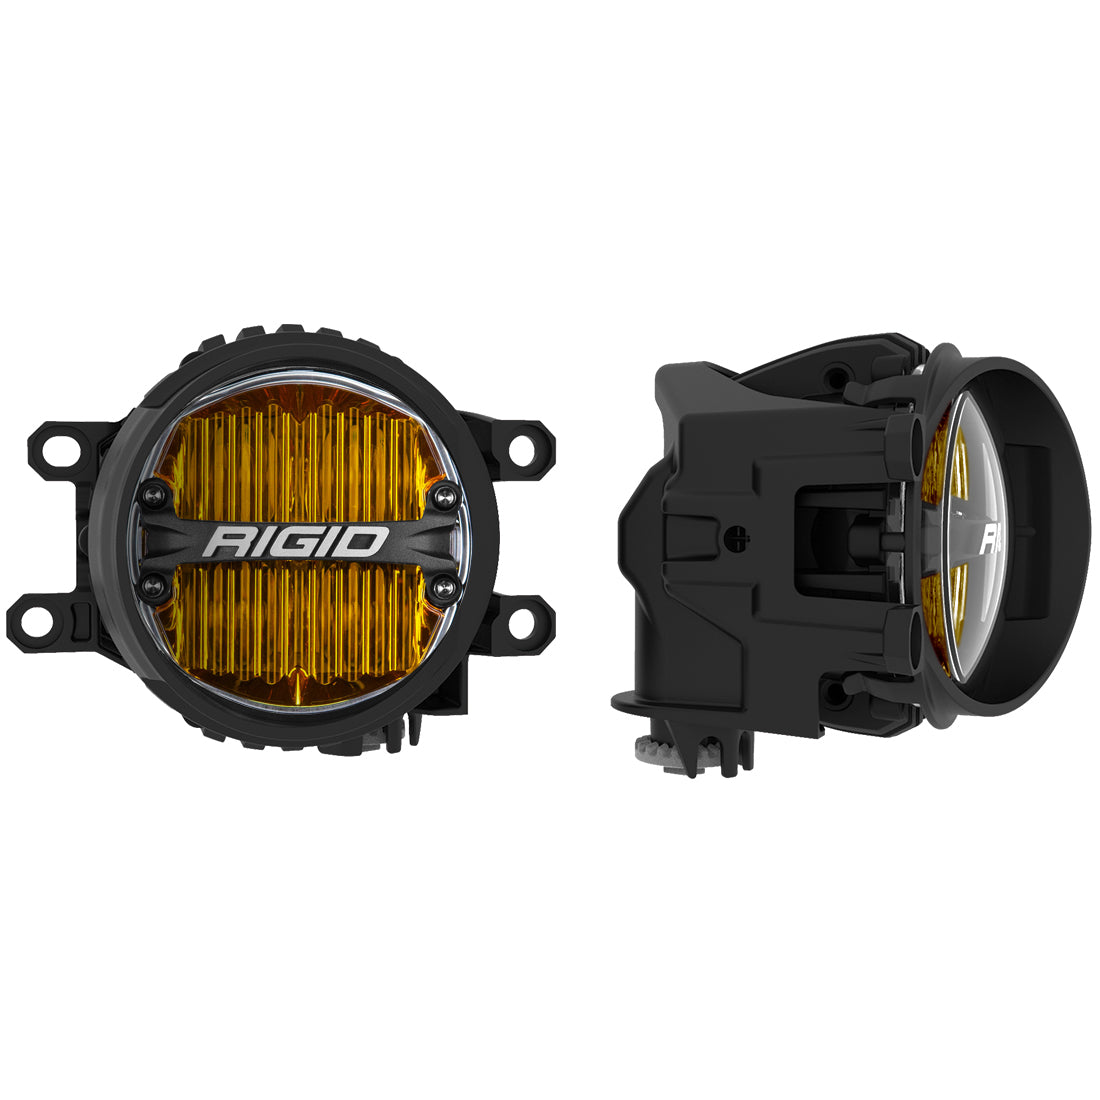 Rigid Industries Toyota Fog Mount Kit For 10-20 Tundra/4Runner 16-20 Tacoma With 1 Set 360-Series 4.0 Inch SAE Yellow Lights RIGID Industries 37117